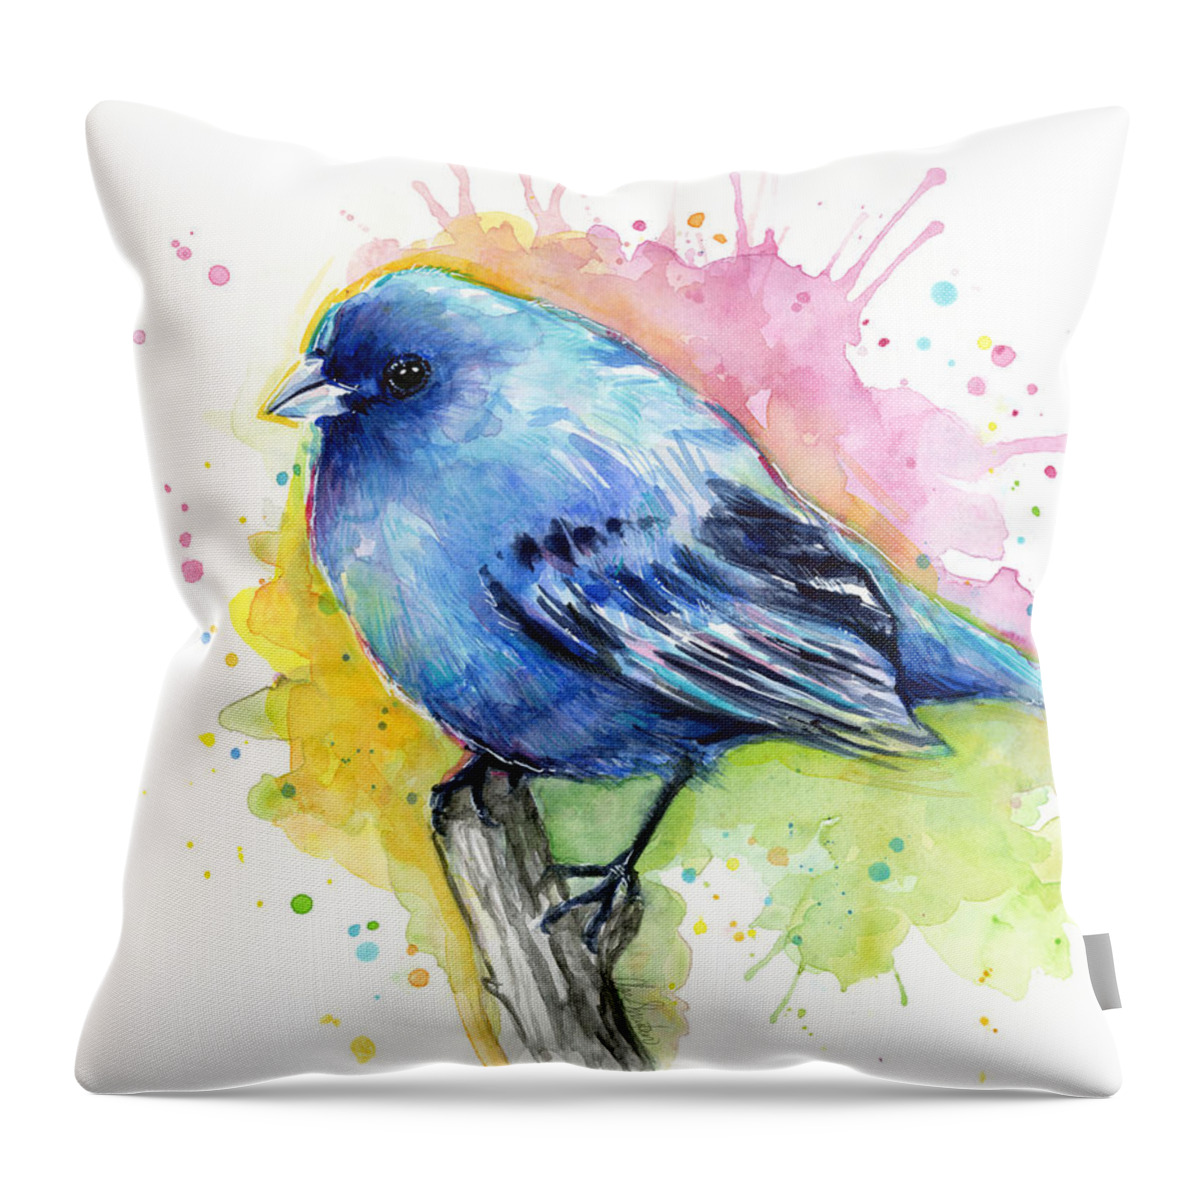 Blue Throw Pillow featuring the painting Indigo Bunting Blue Bird Watercolor by Olga Shvartsur